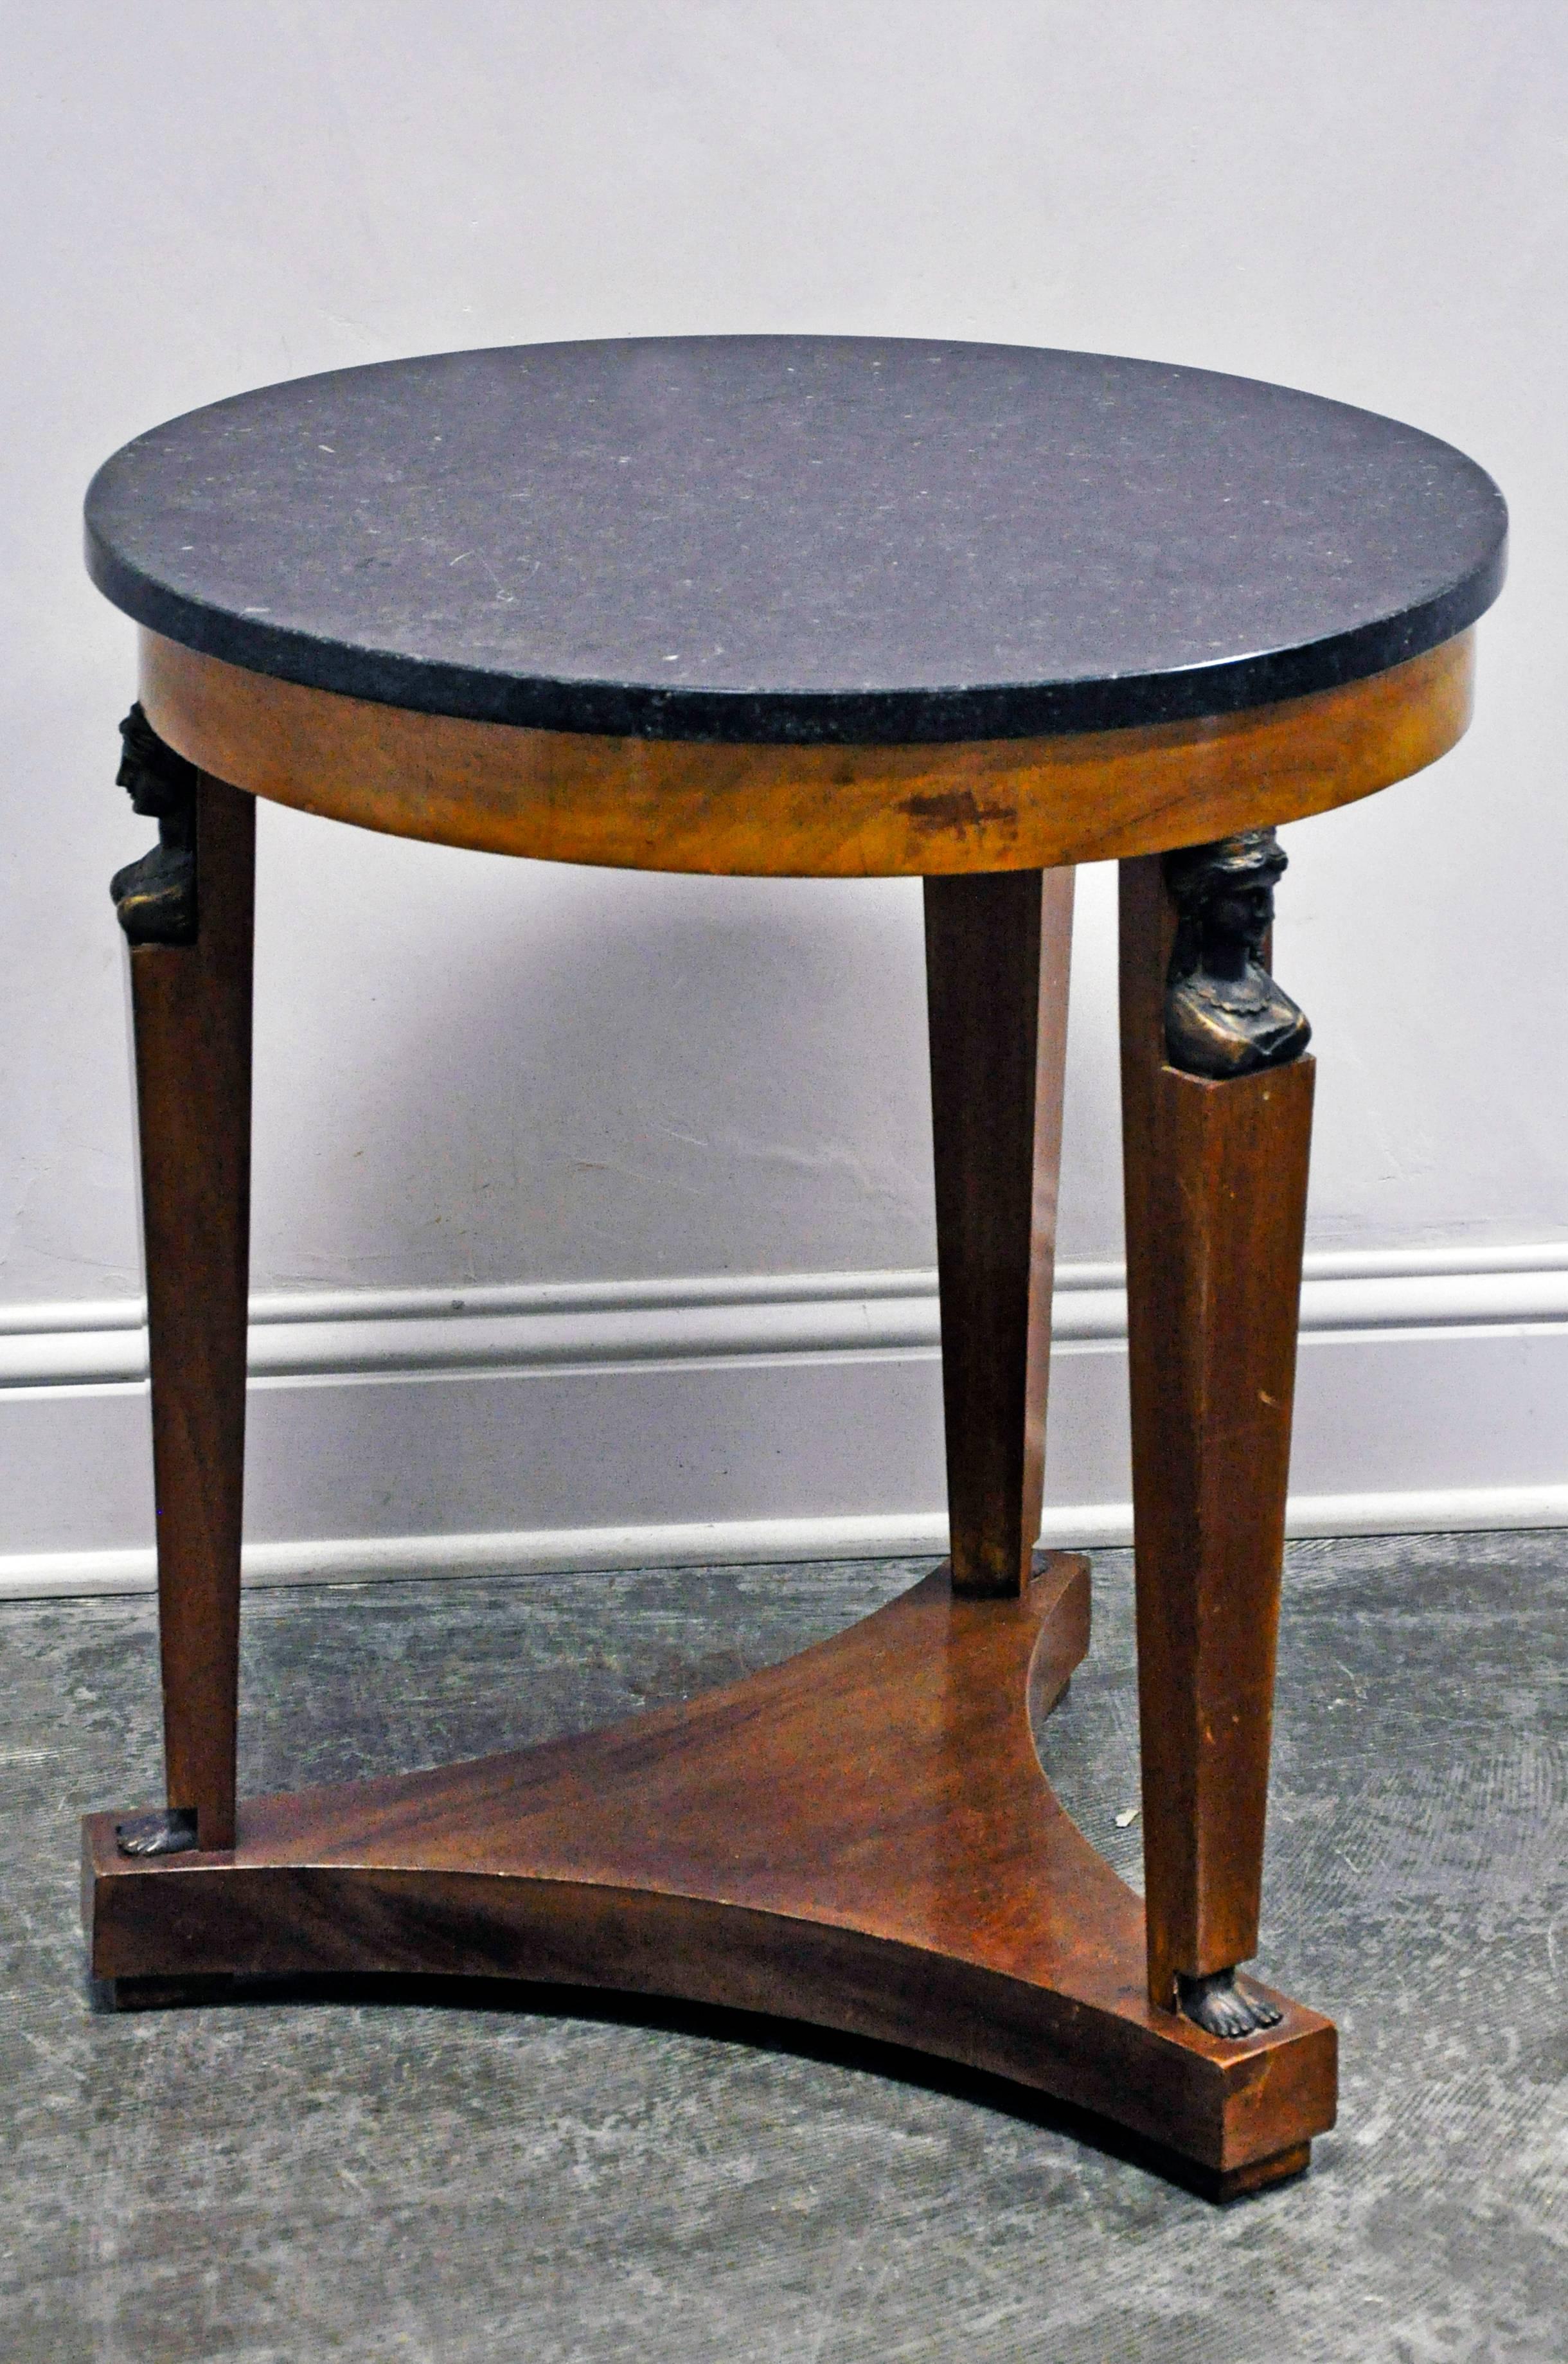 Classic Empire, occasional gueridon with lovely fruitwood veneer top set on three solid wood legs with triangular, inwardly curved base supporting original marble top. Female bust and feet ornament each tapered leg with beautiful detail and patina.